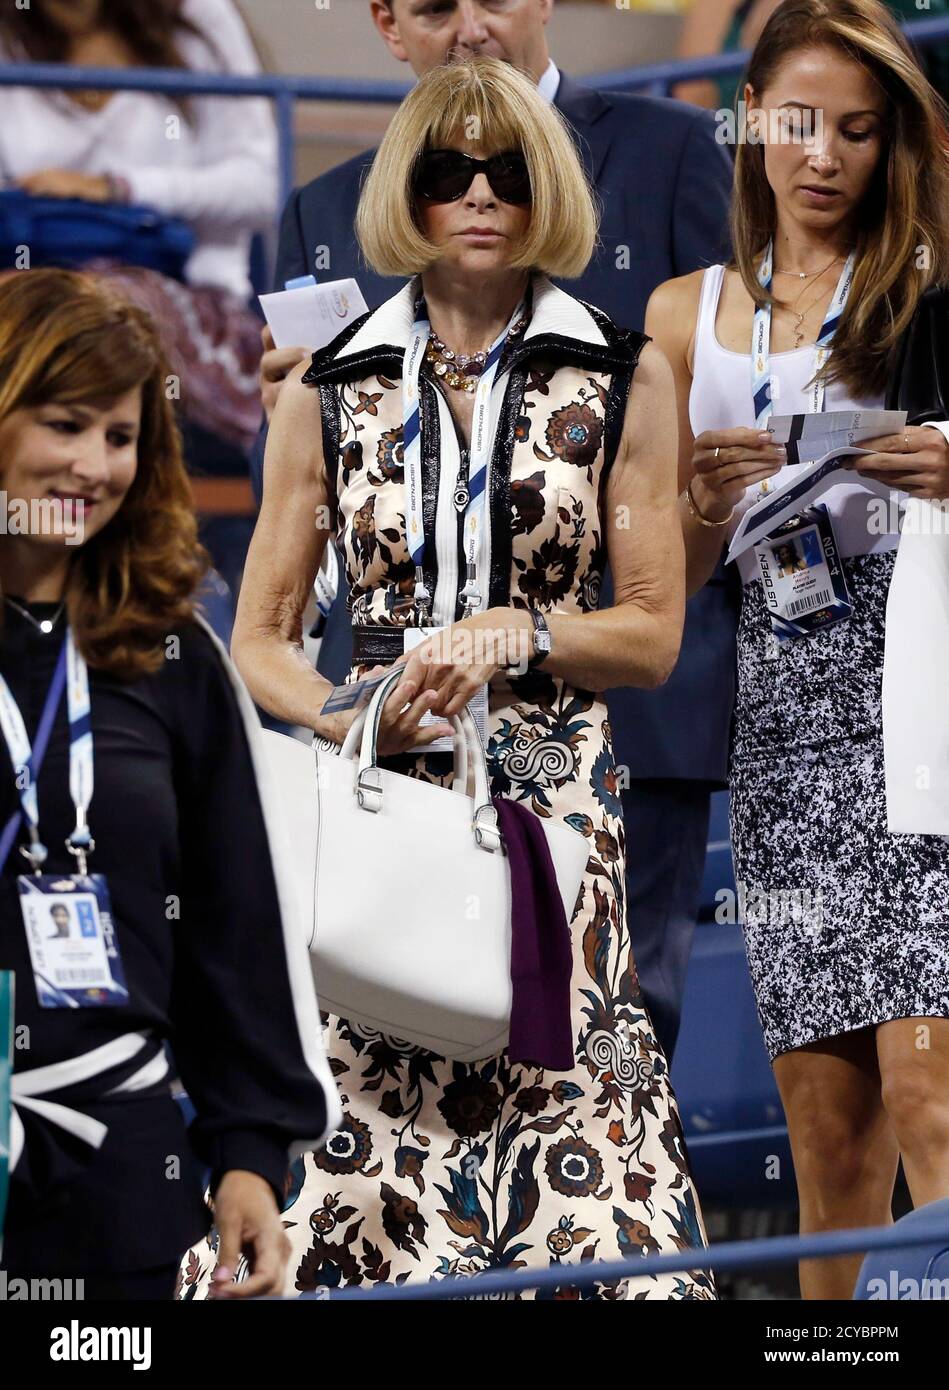 English editor-in-chief of American Vogue Anna Wintour (C) arrives at the  2014 U.S. Open tennis tournament in New York, September 4, 2014.  REUTERS/Mike Segar (UNITED STATES - Tags: SPORT TENNIS ENTERTAINMENT SOCIETY